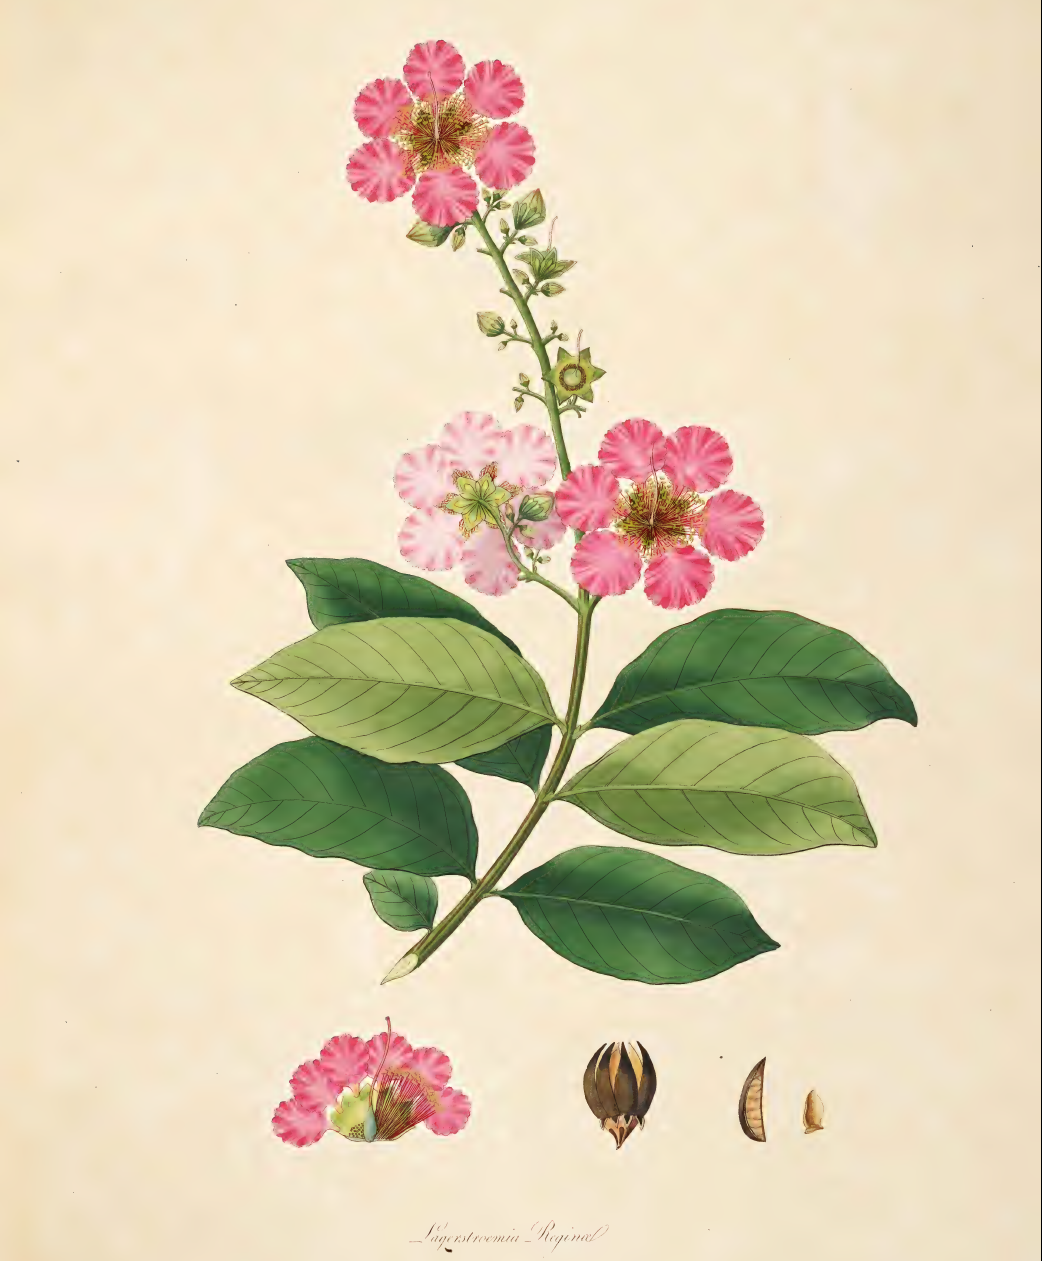 A 19th century technical illustration of a plant with almond-shaped green leaves and six-lobed pink flowers. There are inset drawing detailing the flower and seeds. The plant's name, 'Lagerstroemia speciosa' is written in thin script at the bottom.